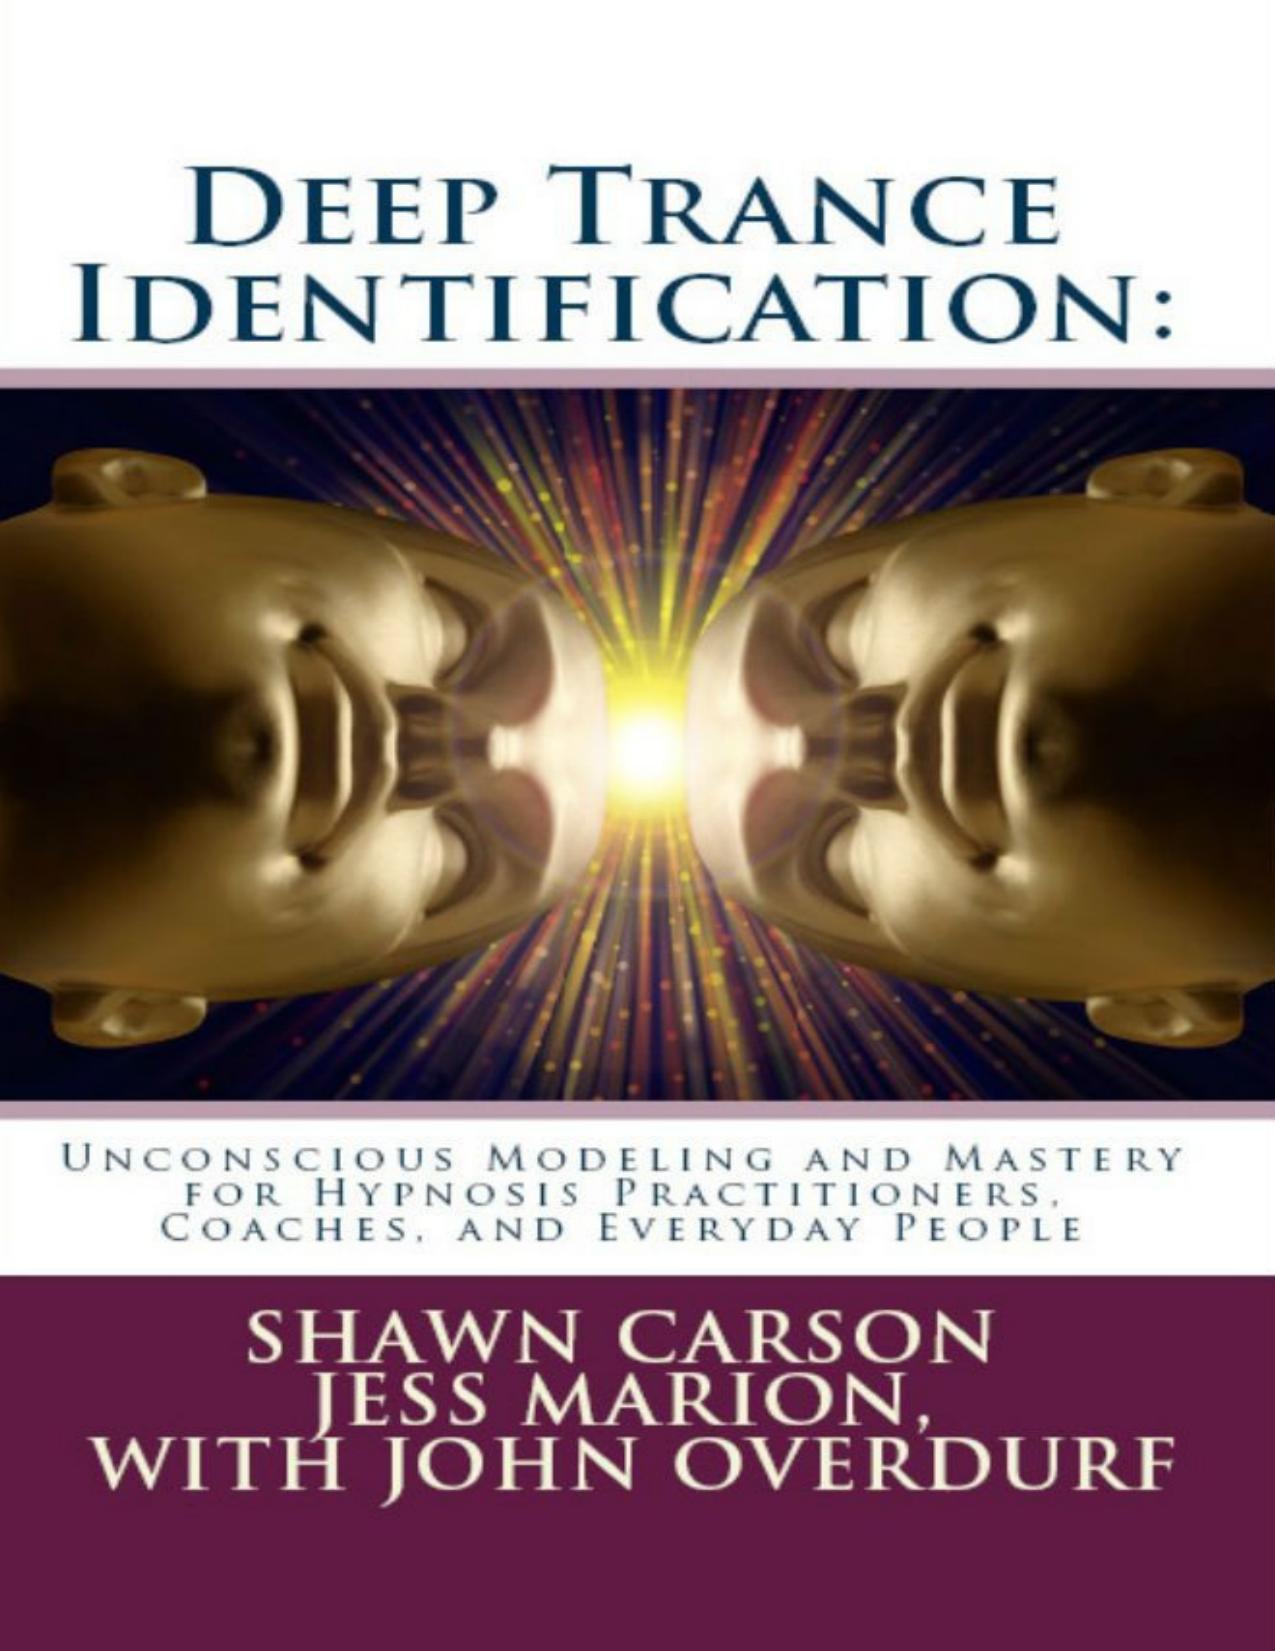 Deep Trance Identification Unconscious Modeling And Mastery For Hypnosis Practitioners Coaches And Everyday People